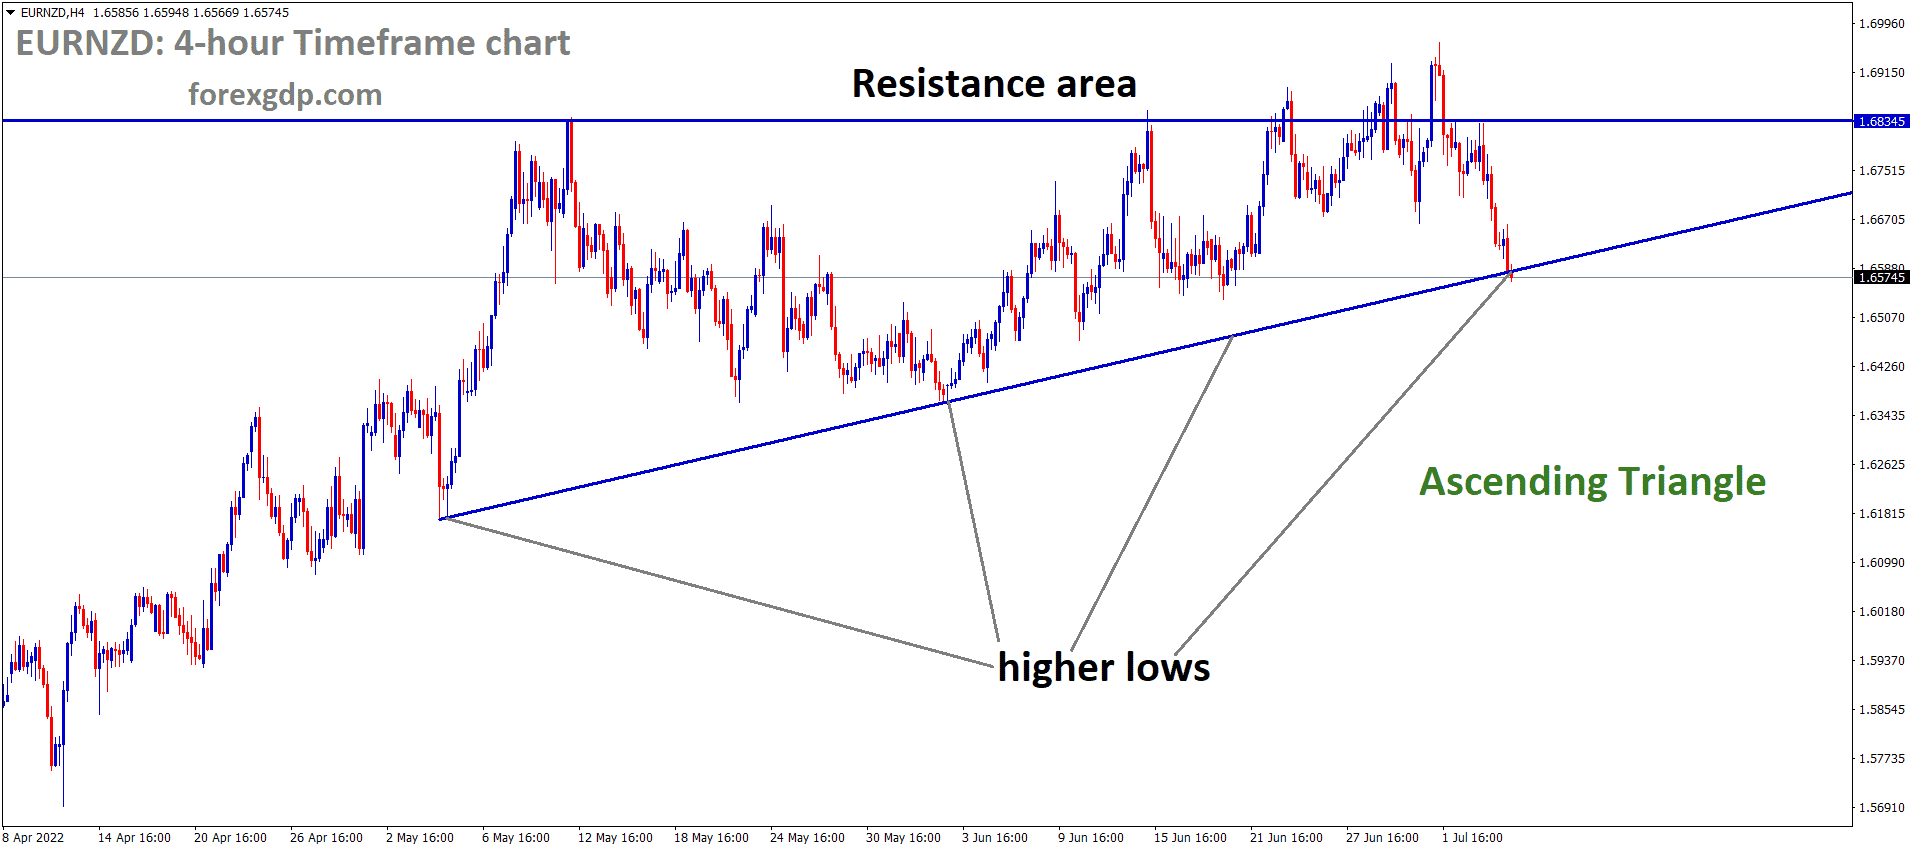 EURNZD is moving in an Ascending triangle pattern and the Market has reached the higher low area of the triangle pattern